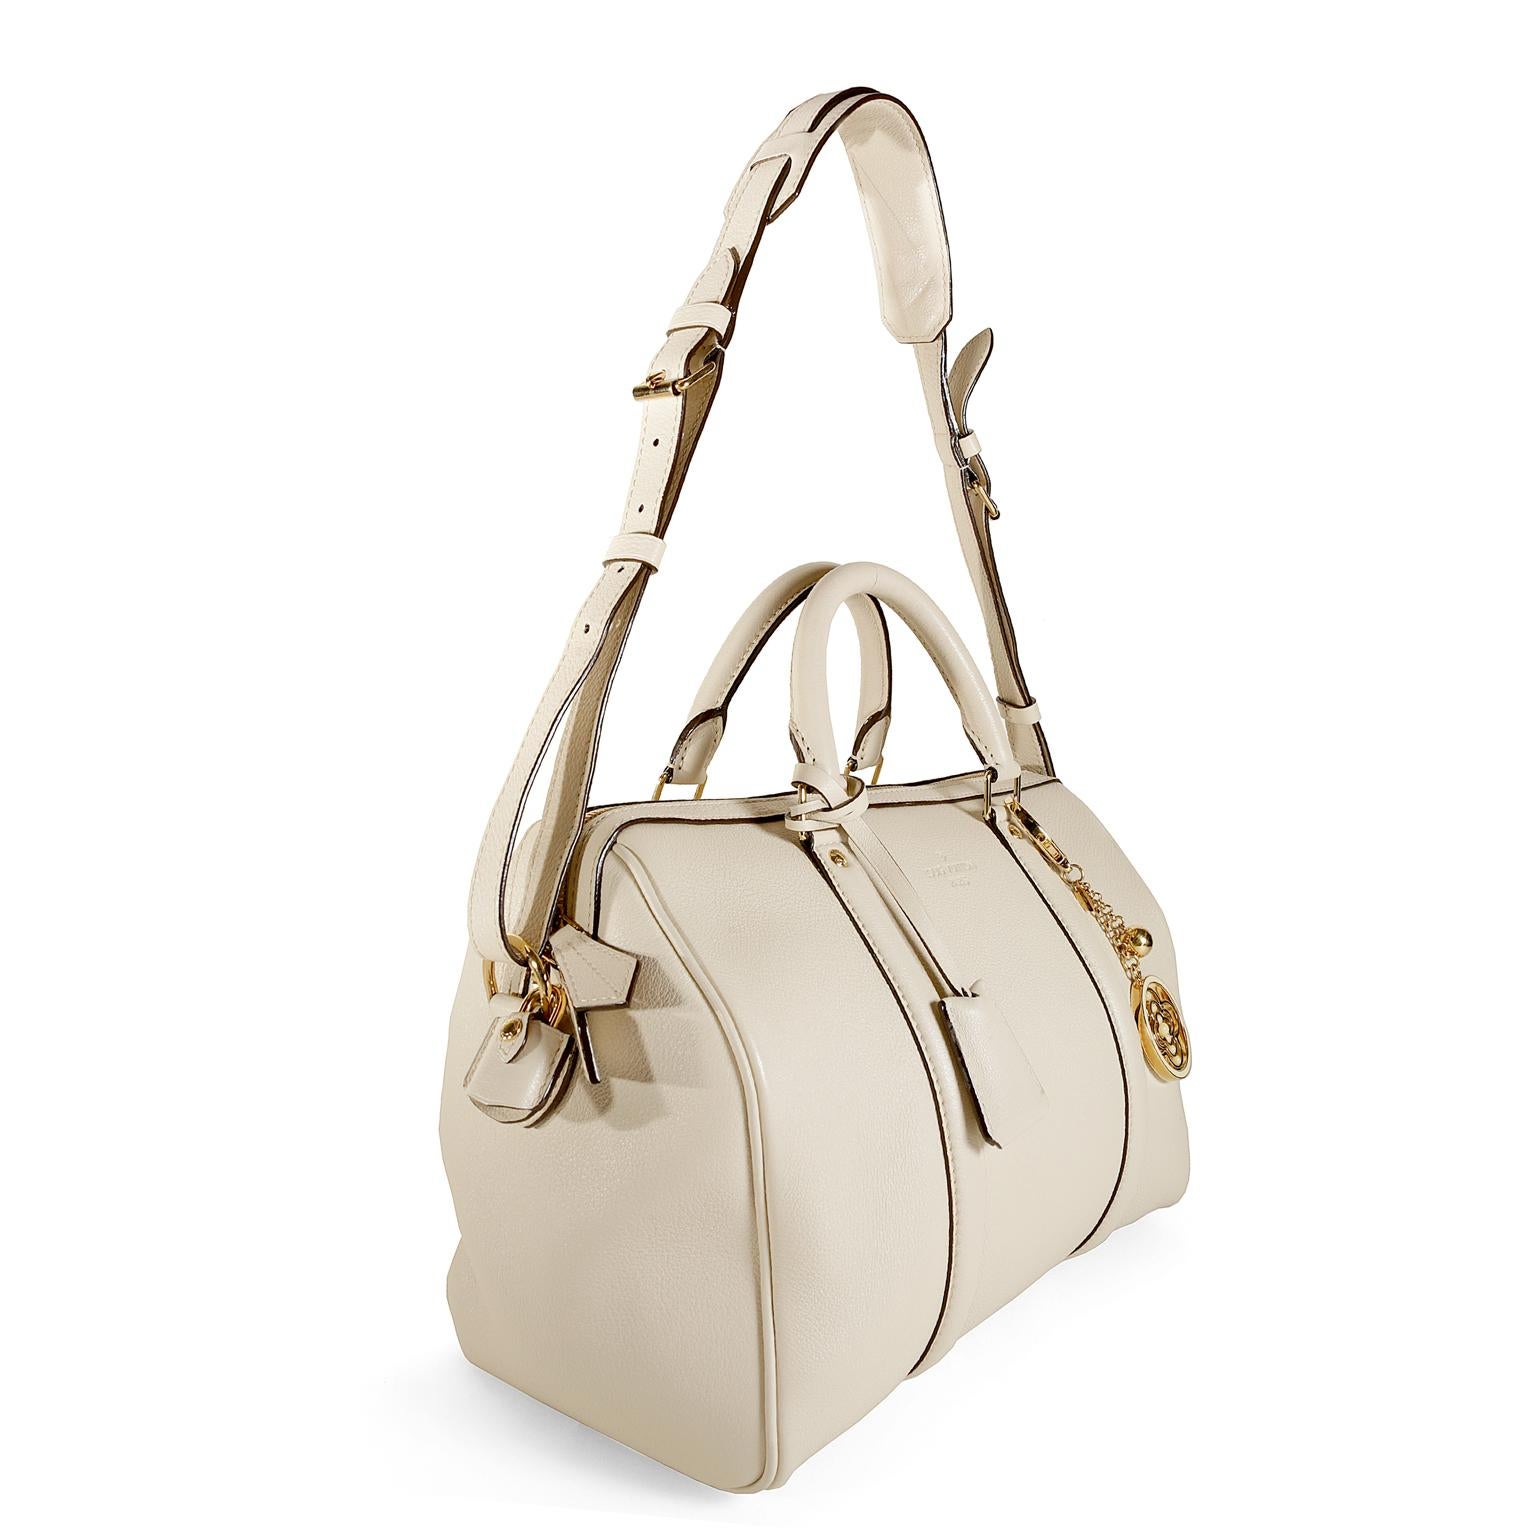 Louis Vuitton Ivory Leather Sophia Coppola SC Bag-  excellent condition, possibly never carried
Perfect for every day, the simple silhouette is roomy and offers an optional shoulder strap.    
Textured ivory leather Speedy inspired top handle bag